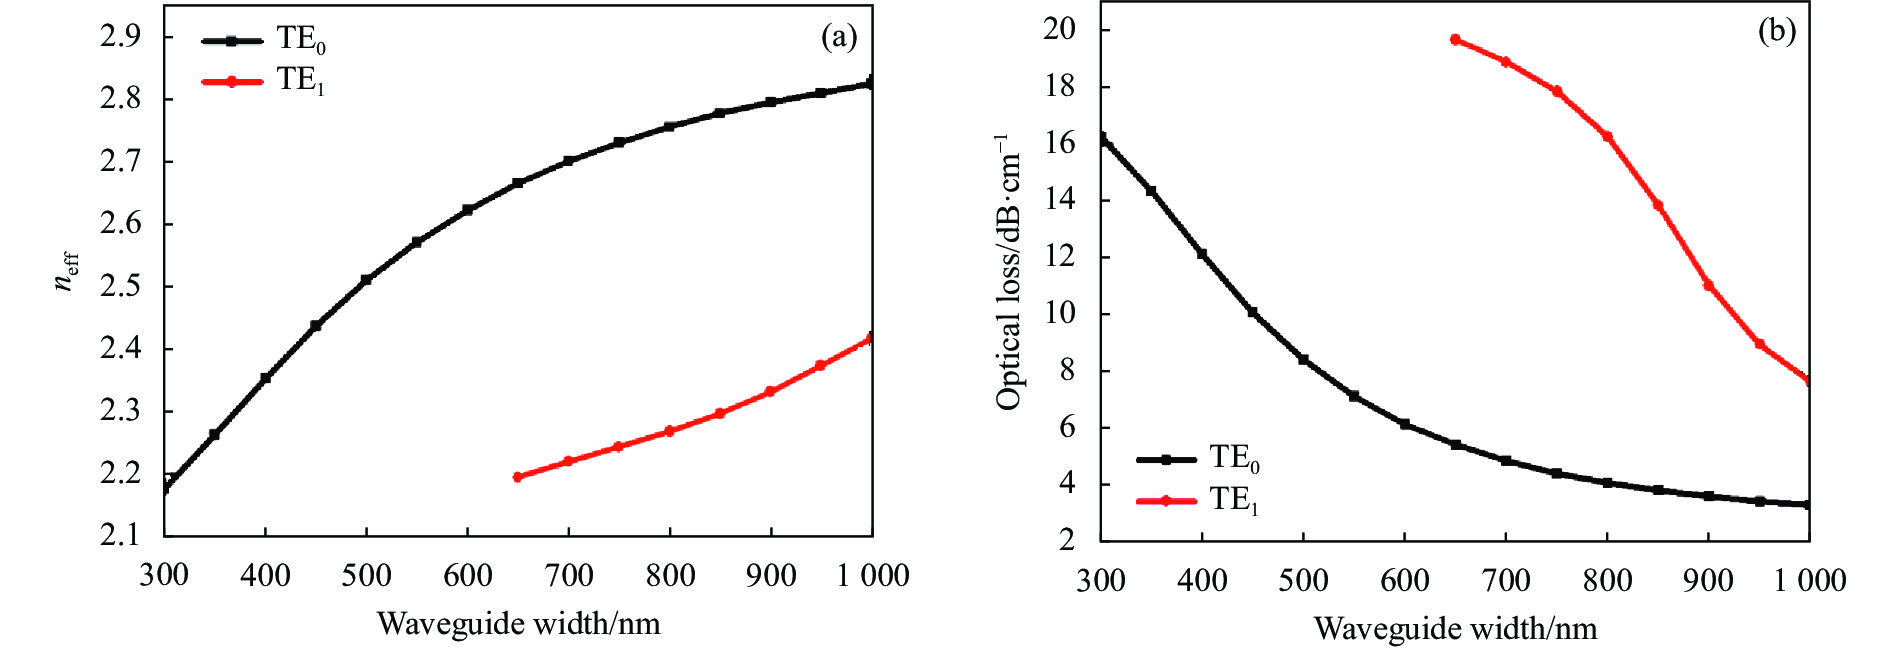 Variation of (a) effective refractive index and (b) optical loss with the waveguide width (Hrib=340 nm, Hslab=100 nm) for TE0 and TE1 modes